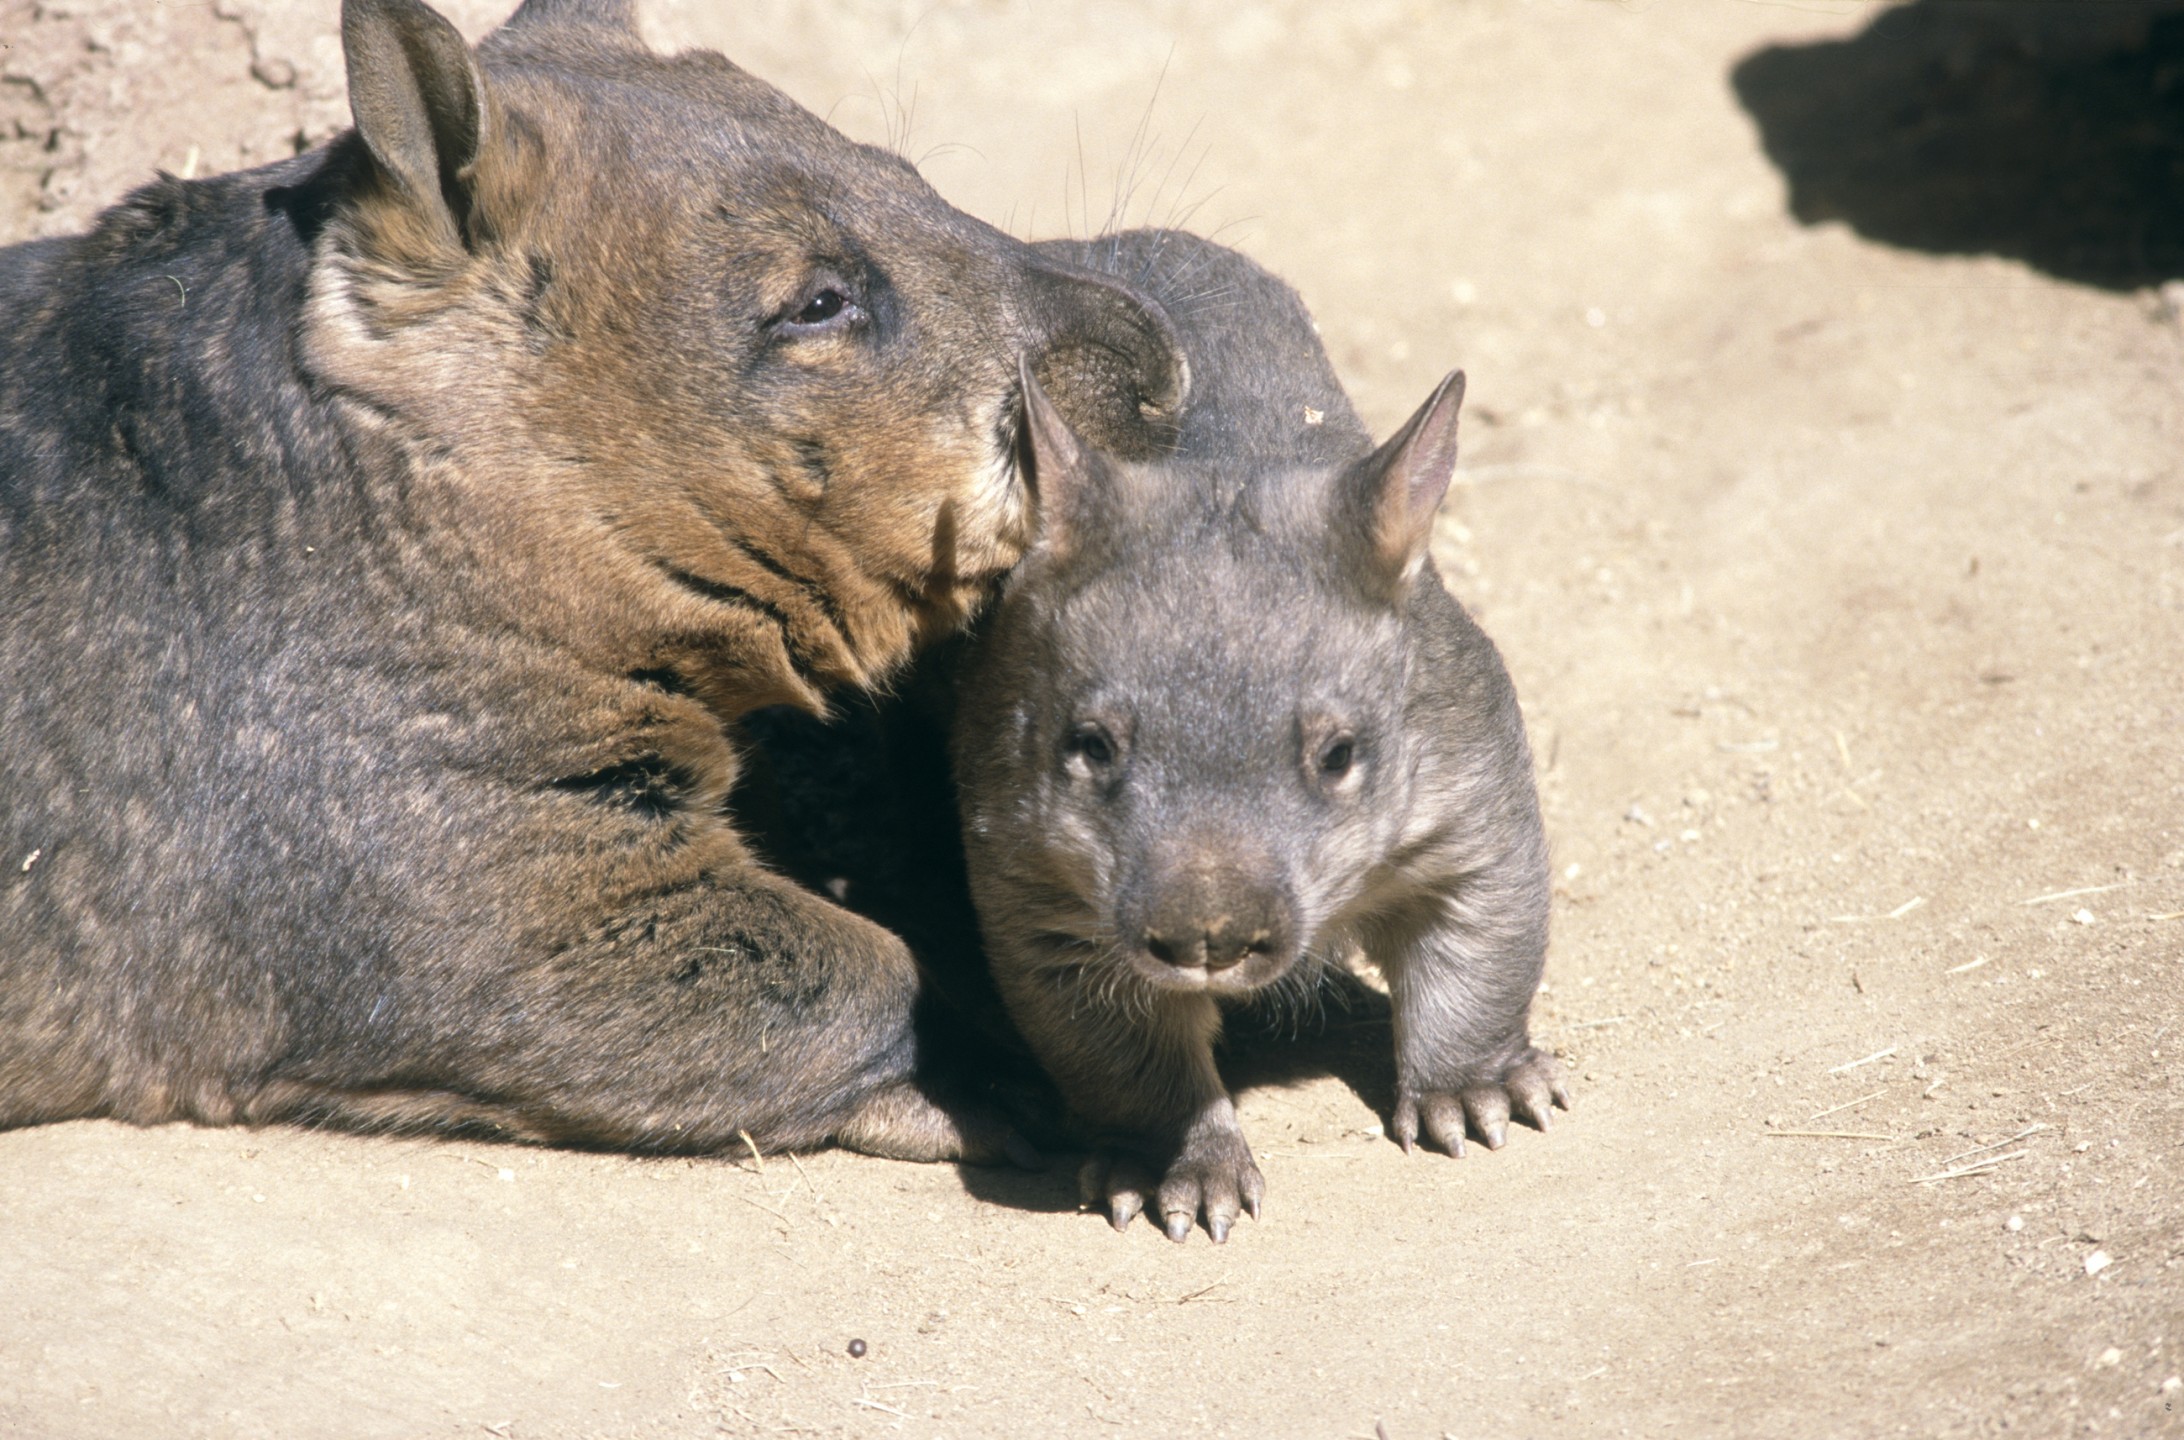 Kindyerra (left) and her joey Kindilan were very close, and they could often been seen playing and resting together, usually with one resting her head on the other.